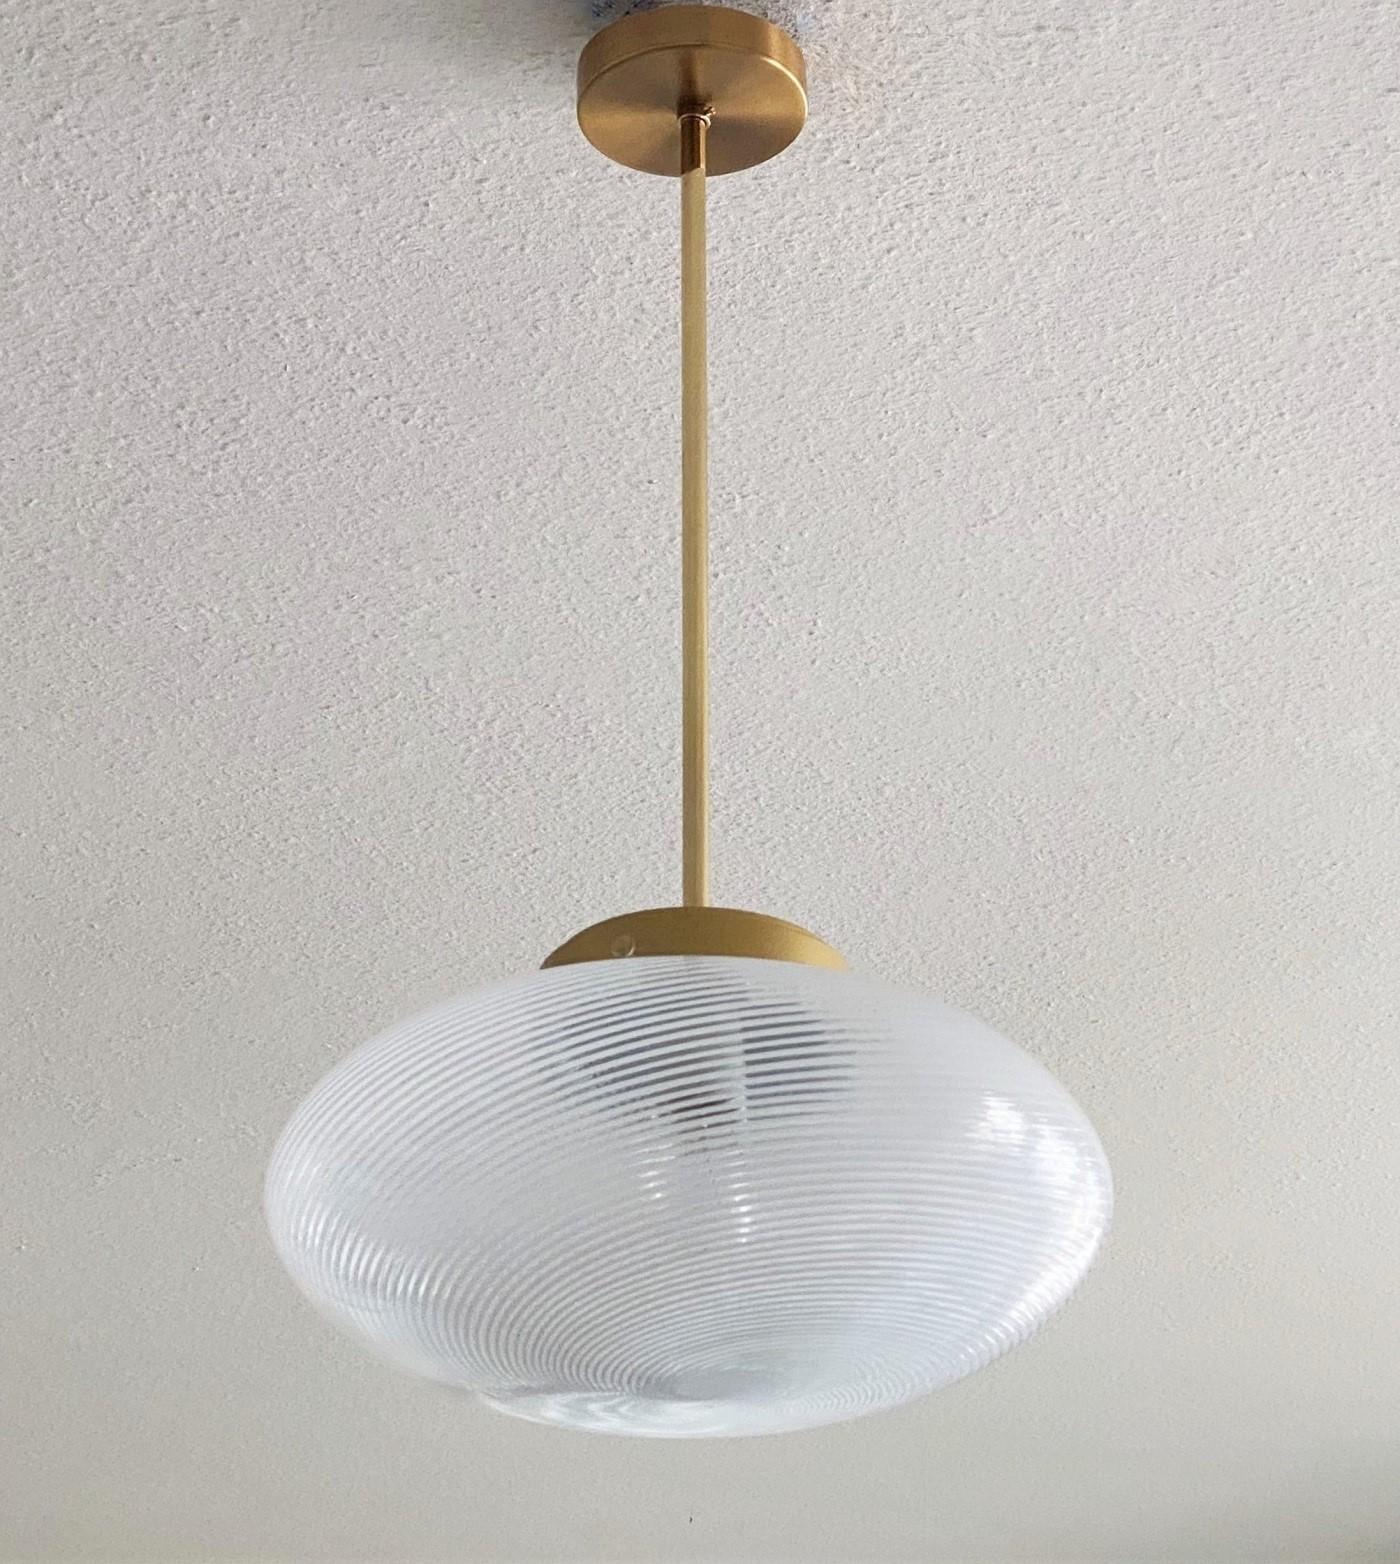 A pair of large hand blown Murano glass pendants by Ludovico Diaz de Santillana for Venini, Series -Tessuto-, Italy, 1960s. Brass and parcel gold enameled metal mounted.
Each pendant takes one E27 large sized bulb up to 100Watt. Both pendants in